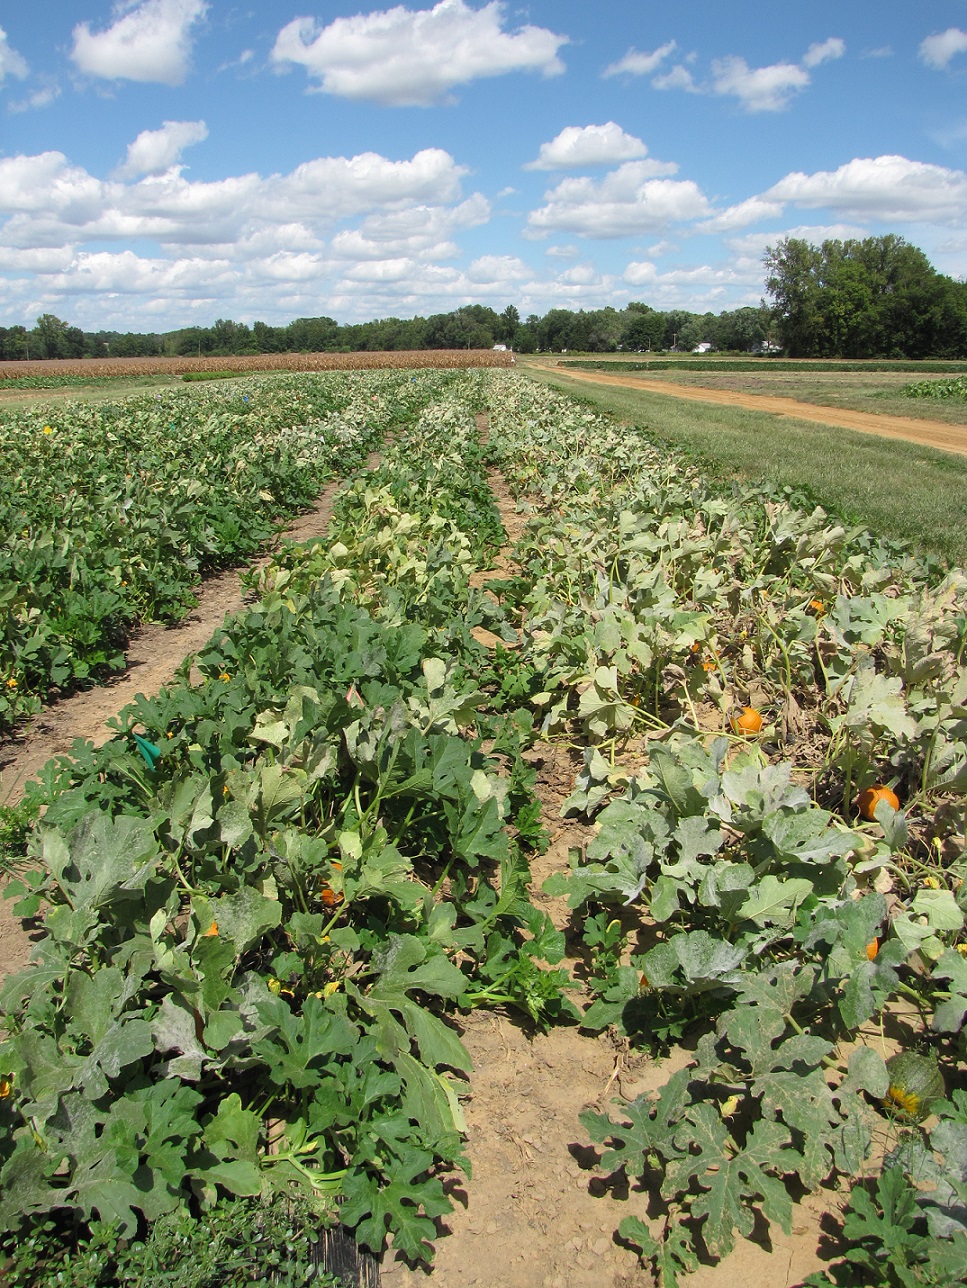 A fungicide trial for products for powdery mildew of pumpkin.  The untreated row on the right has significant symptoms of powdery mildew.  The adjacent row to the left has been treated with a systemic fungicide and has relatively mild symptoms.  